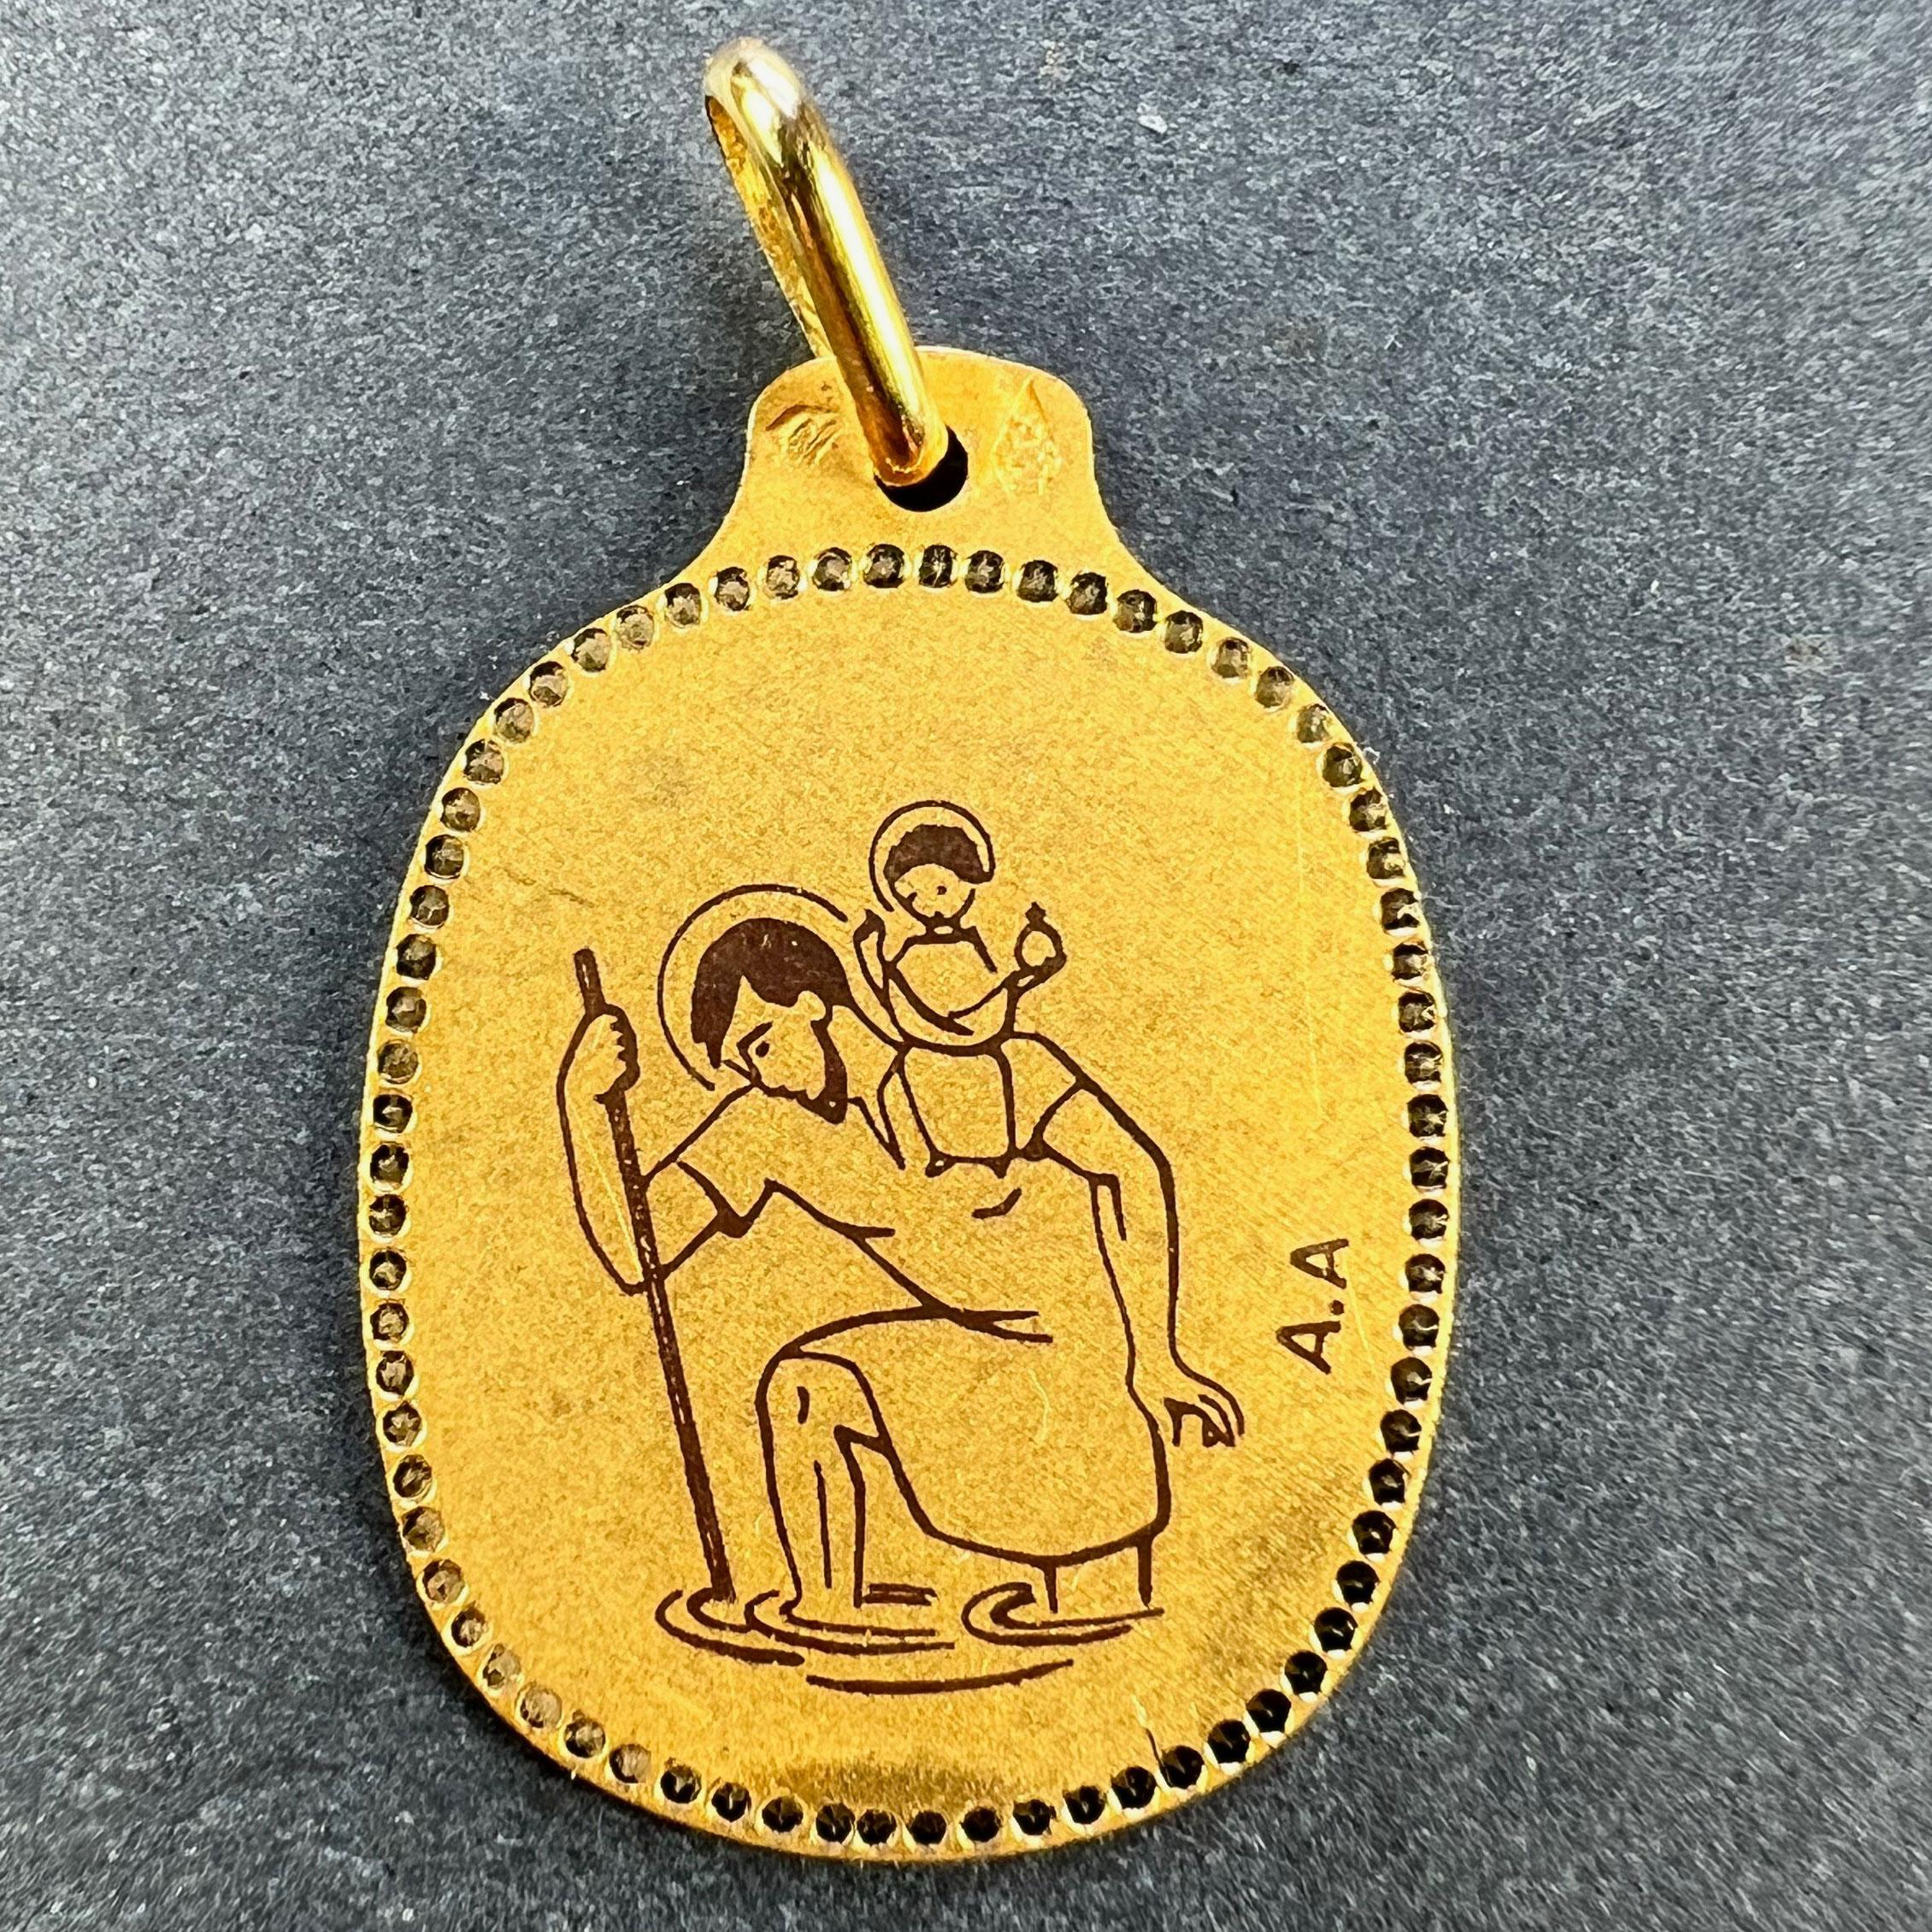 A French 18 karat (18K) yellow gold charm pendant or medal by Augis depicting St Christopher carrying the infant Christ across the river with black enamel detail and punched dot border. Stamped with the eagle's head for French manufacture, Augis'